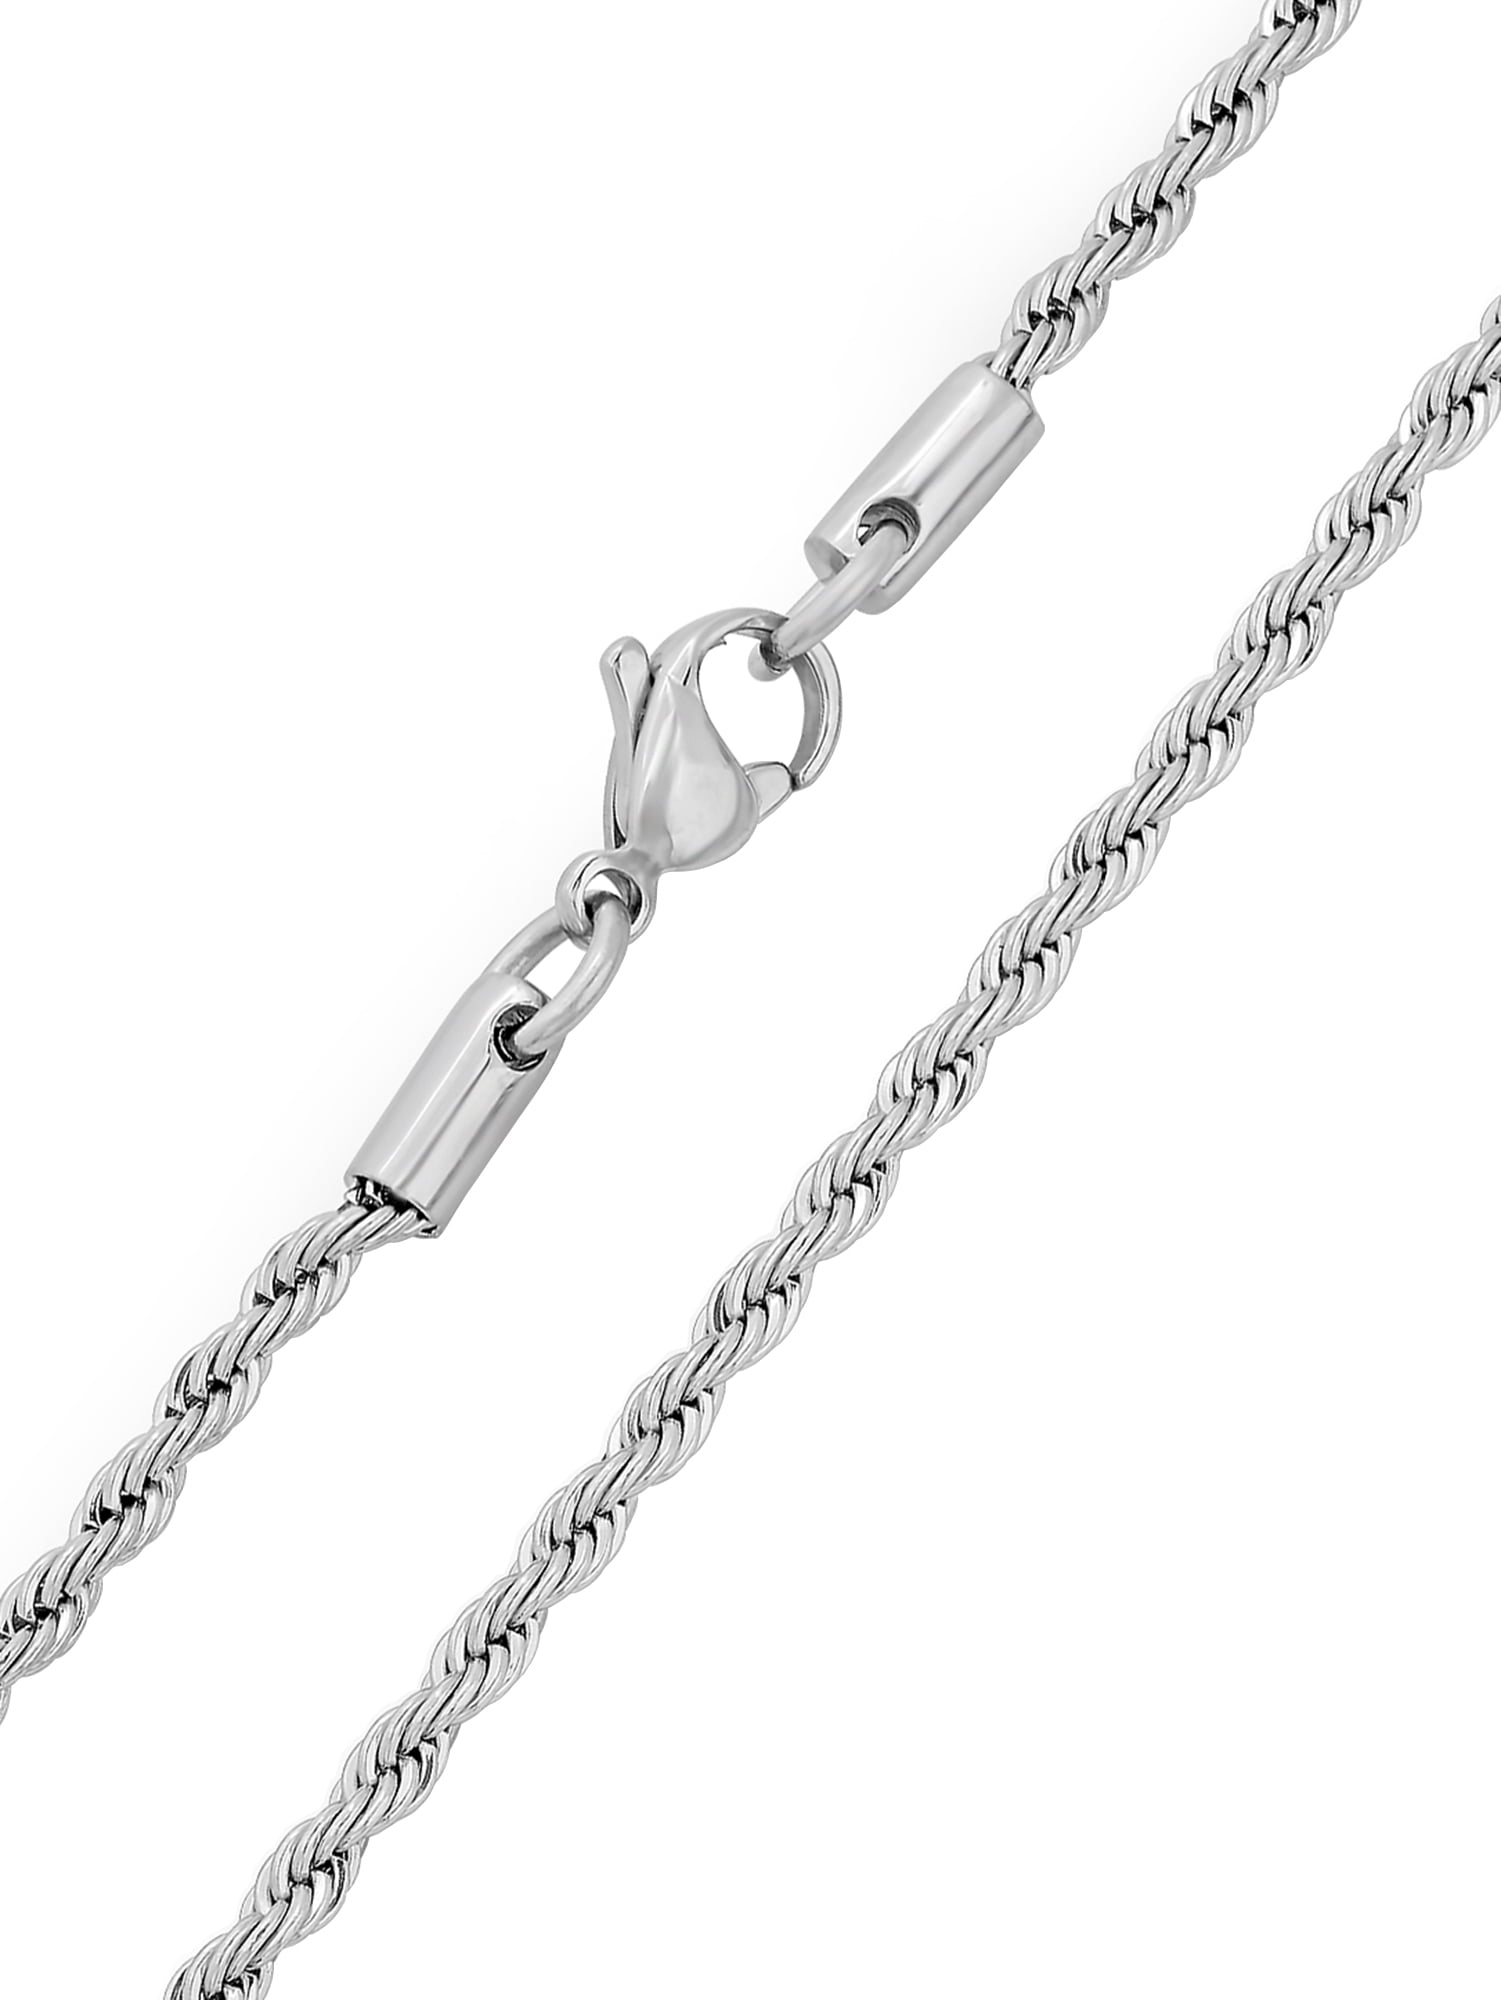 INOX Jewelry NSTC026K-24 Super Rope Stainless Steel Chain Black - 3 mm & 24 in.